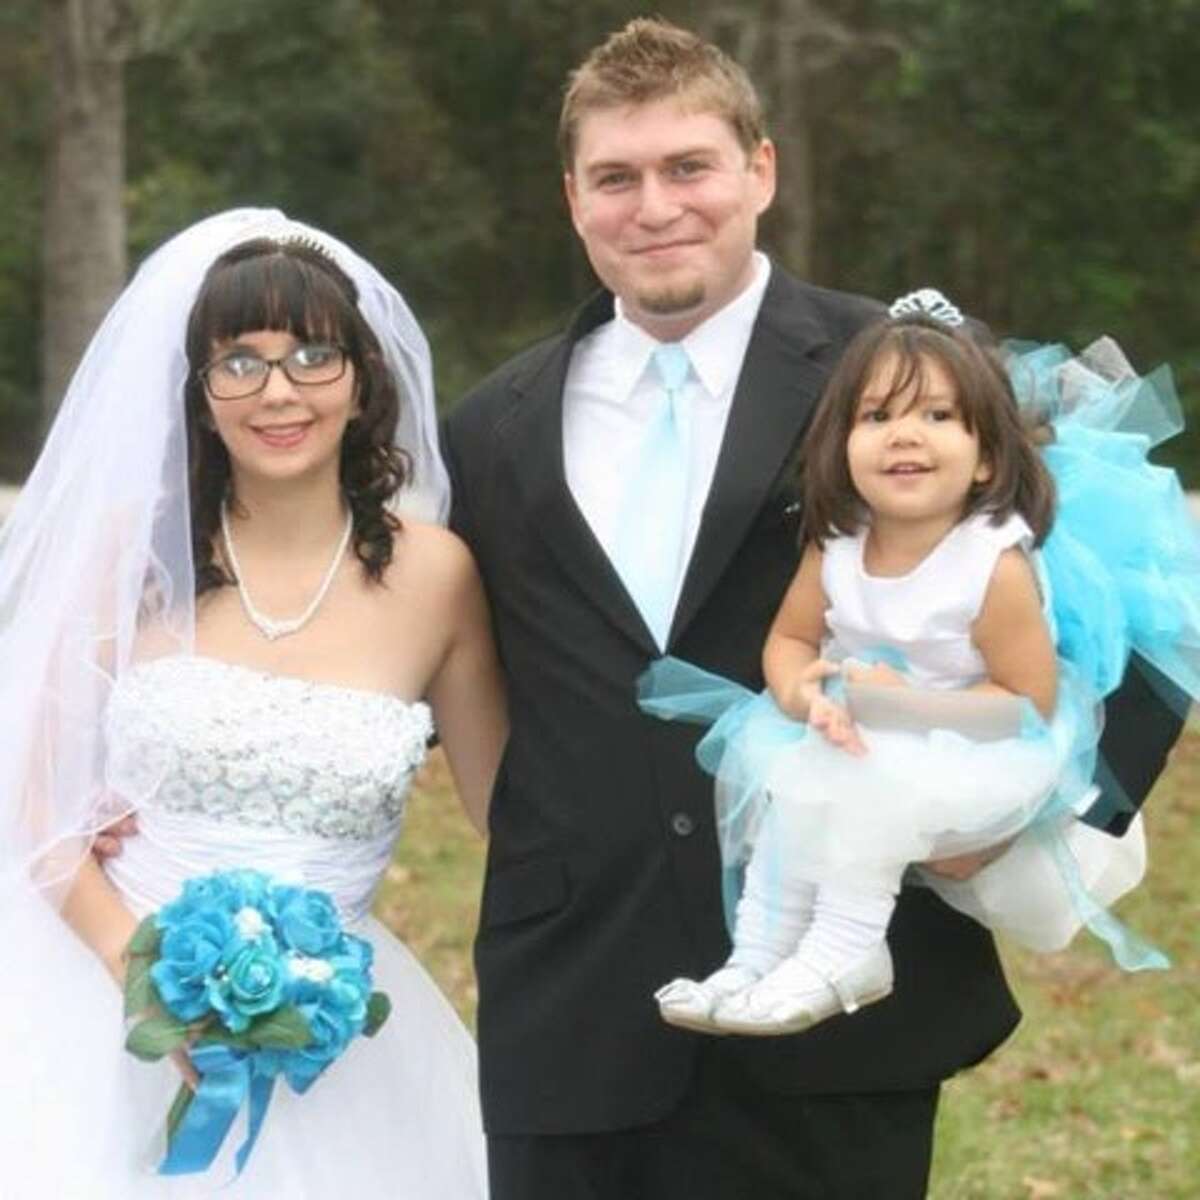 Splendora firefighter Brad Frazier and his wife Shea, both 21, were killed and their young children injured when their vehicle was struck by a drunk driver on May 17, 2015.